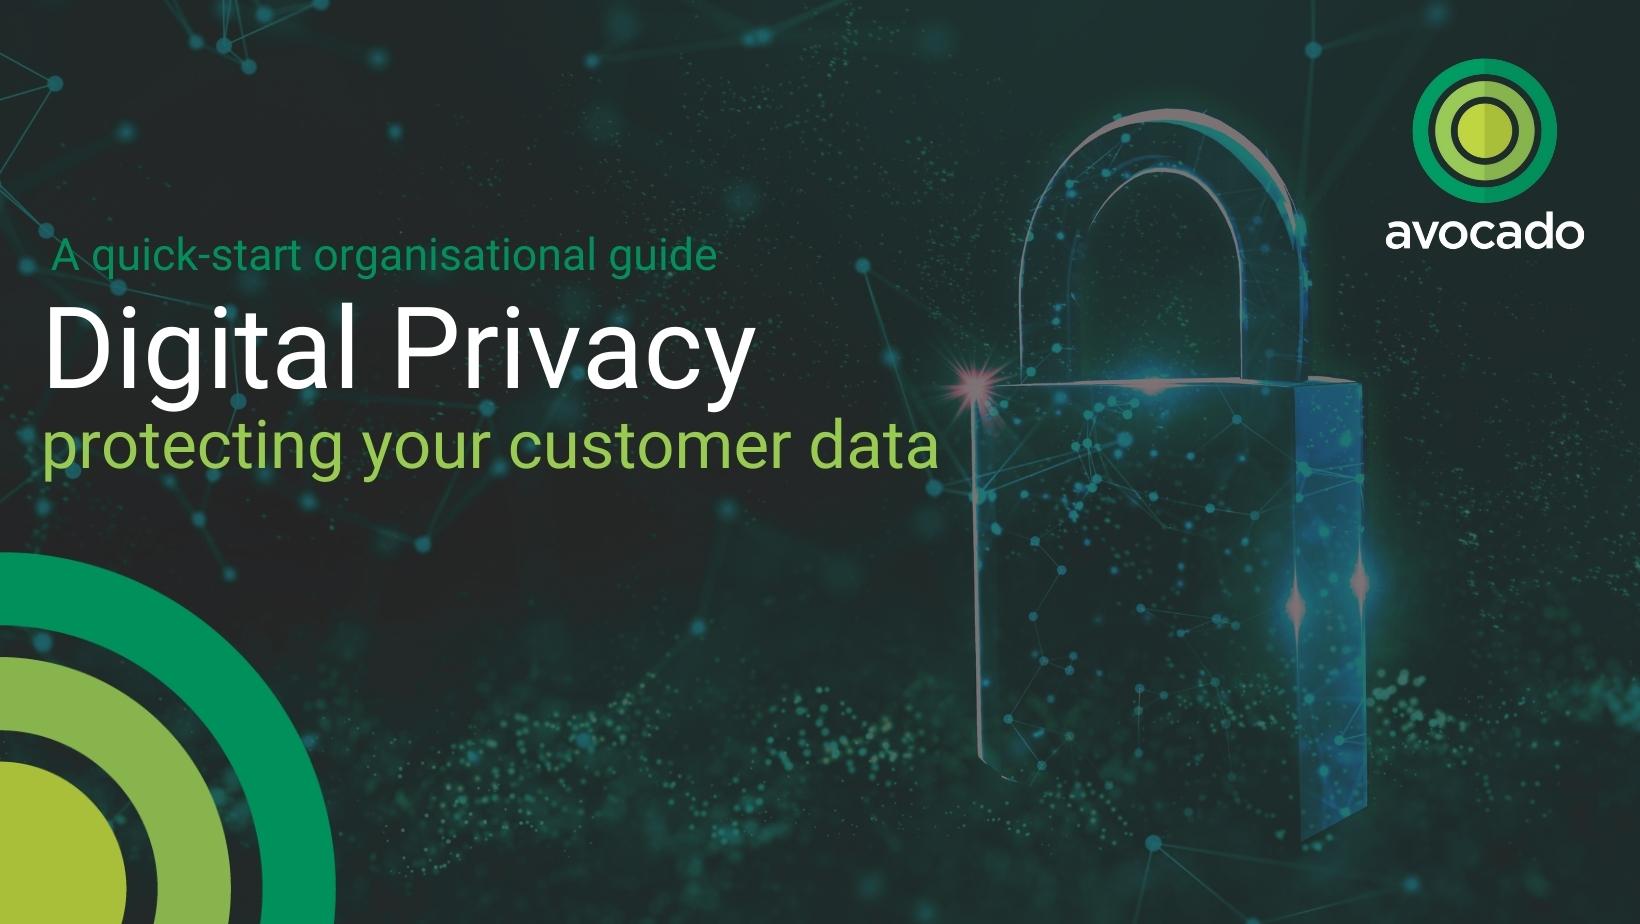 Digital privacy: protecting your customer data